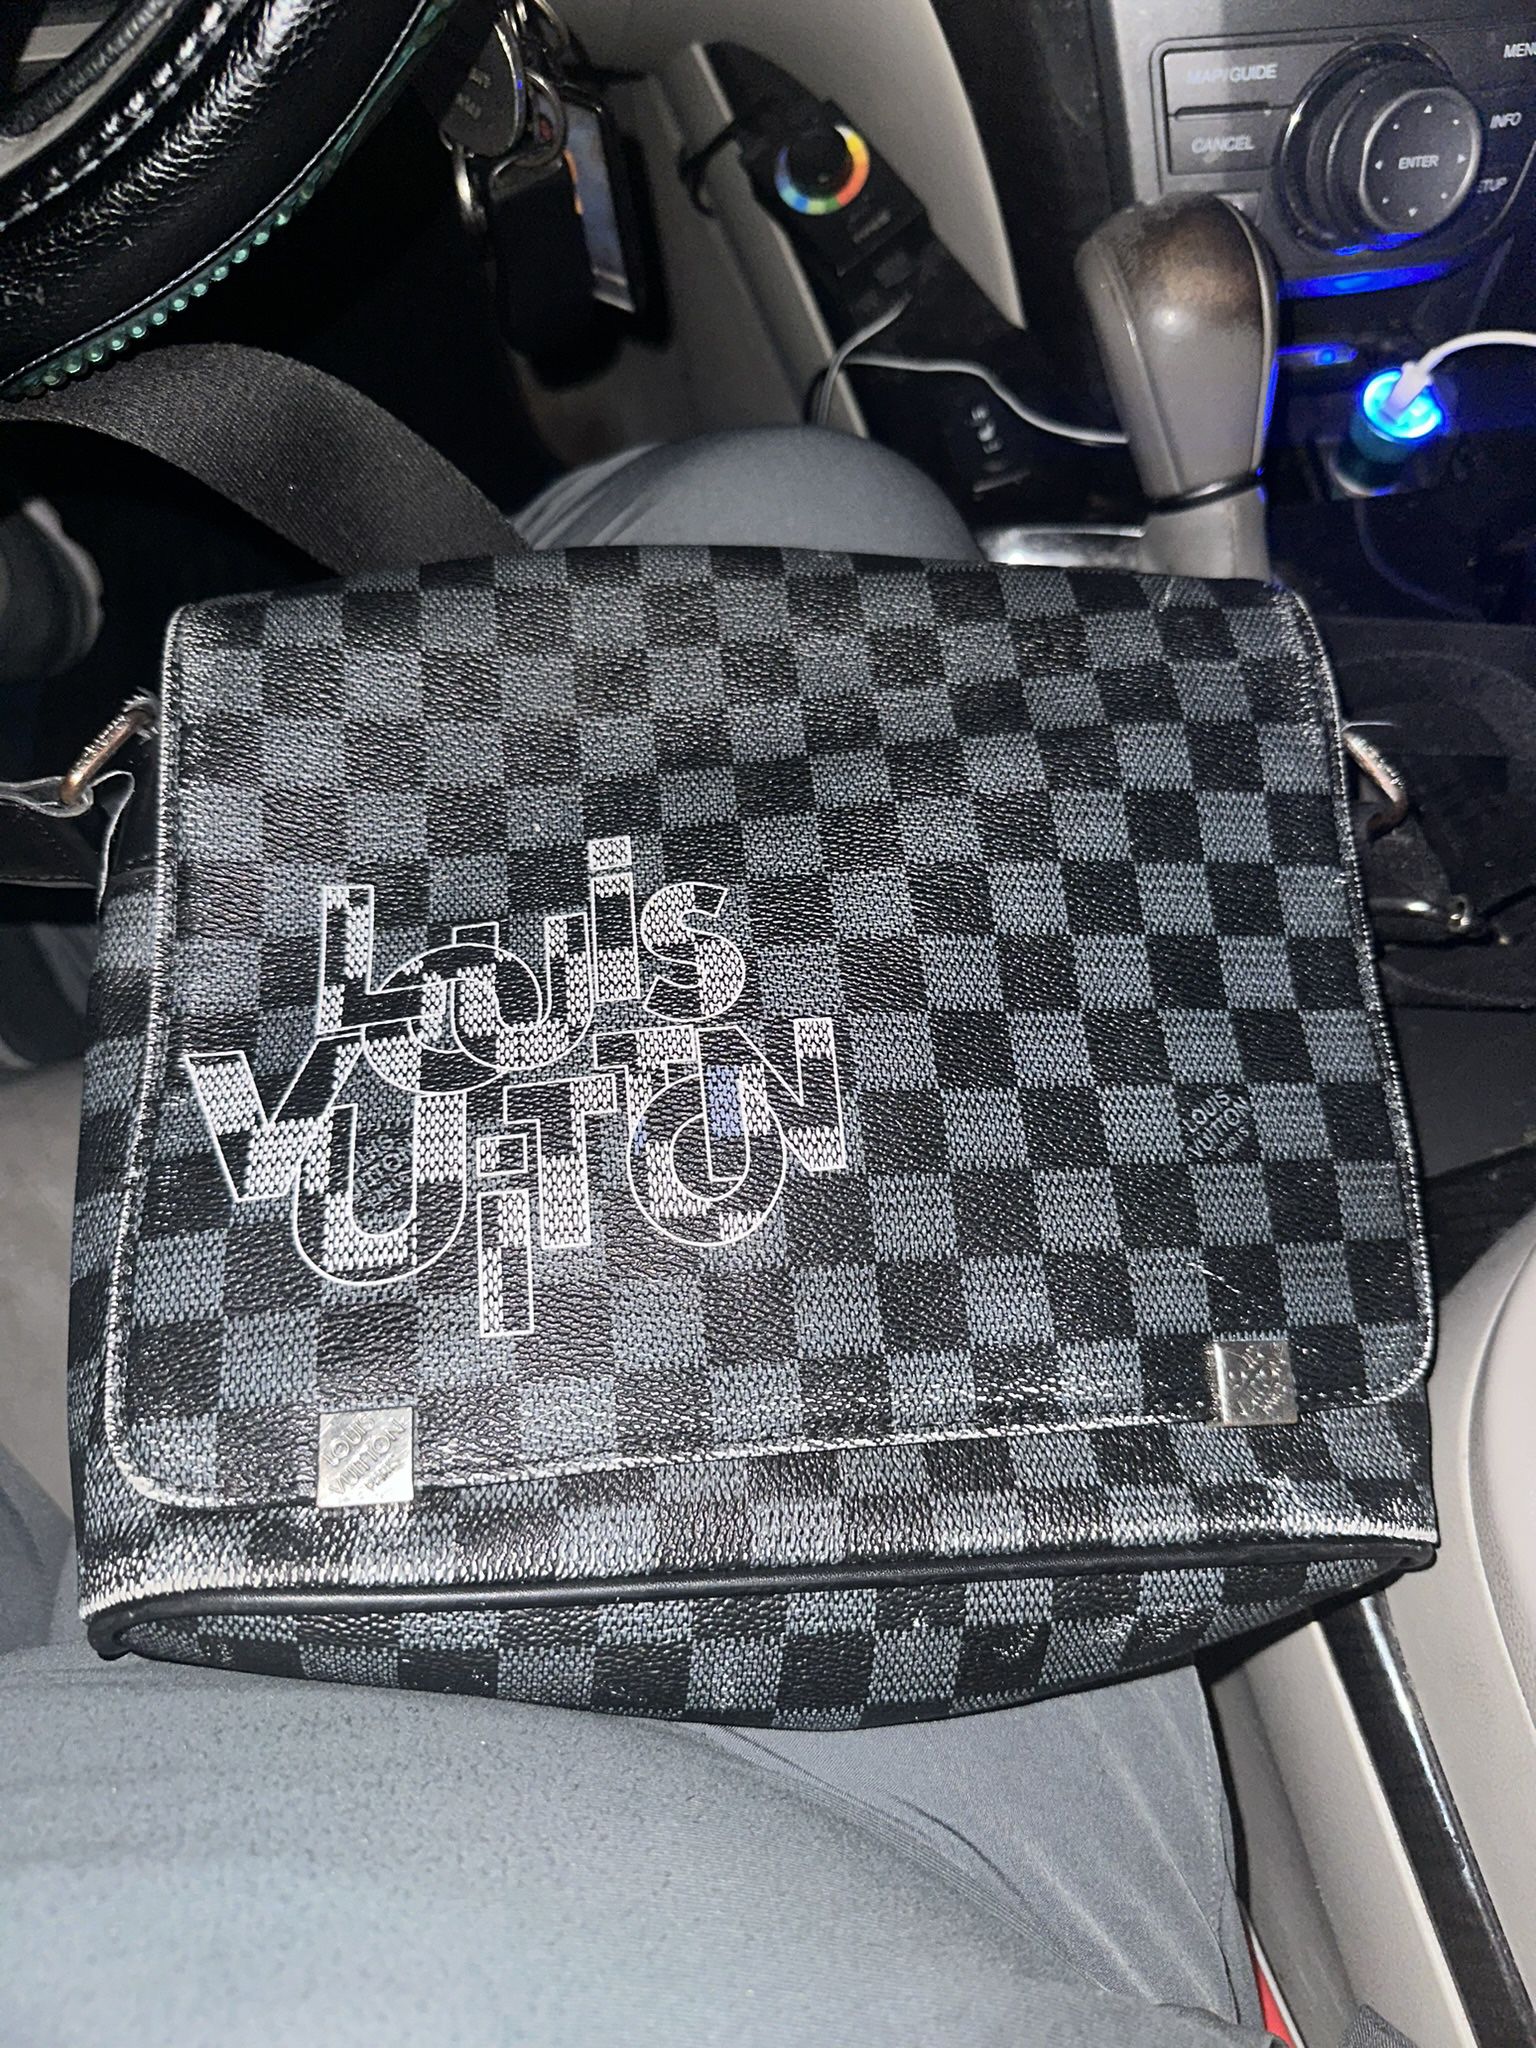 Louis vuitton man bag for Sale in Baltimore, MD - OfferUp